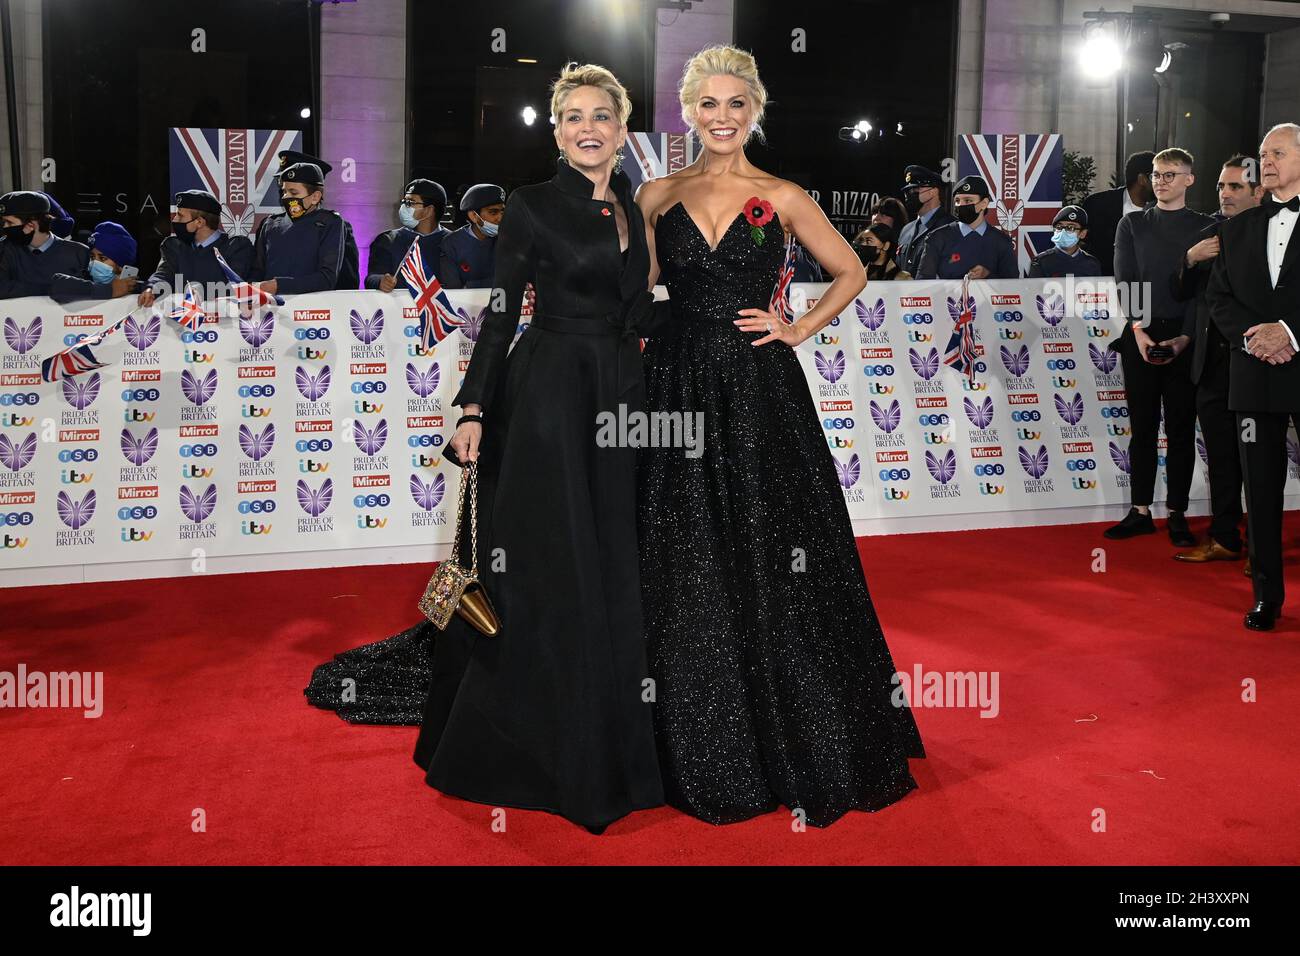 London, UK. 30 October 2021. Sharon Stone and Hannah Waddingham arriving at the Pride of Britain Awards, at the The Grosvenor House Hotel, London. Picture date: Saturday October 30, 2021. Photo credit should read: Matt Crossick/Empics/Alamy Live News Stock Photo